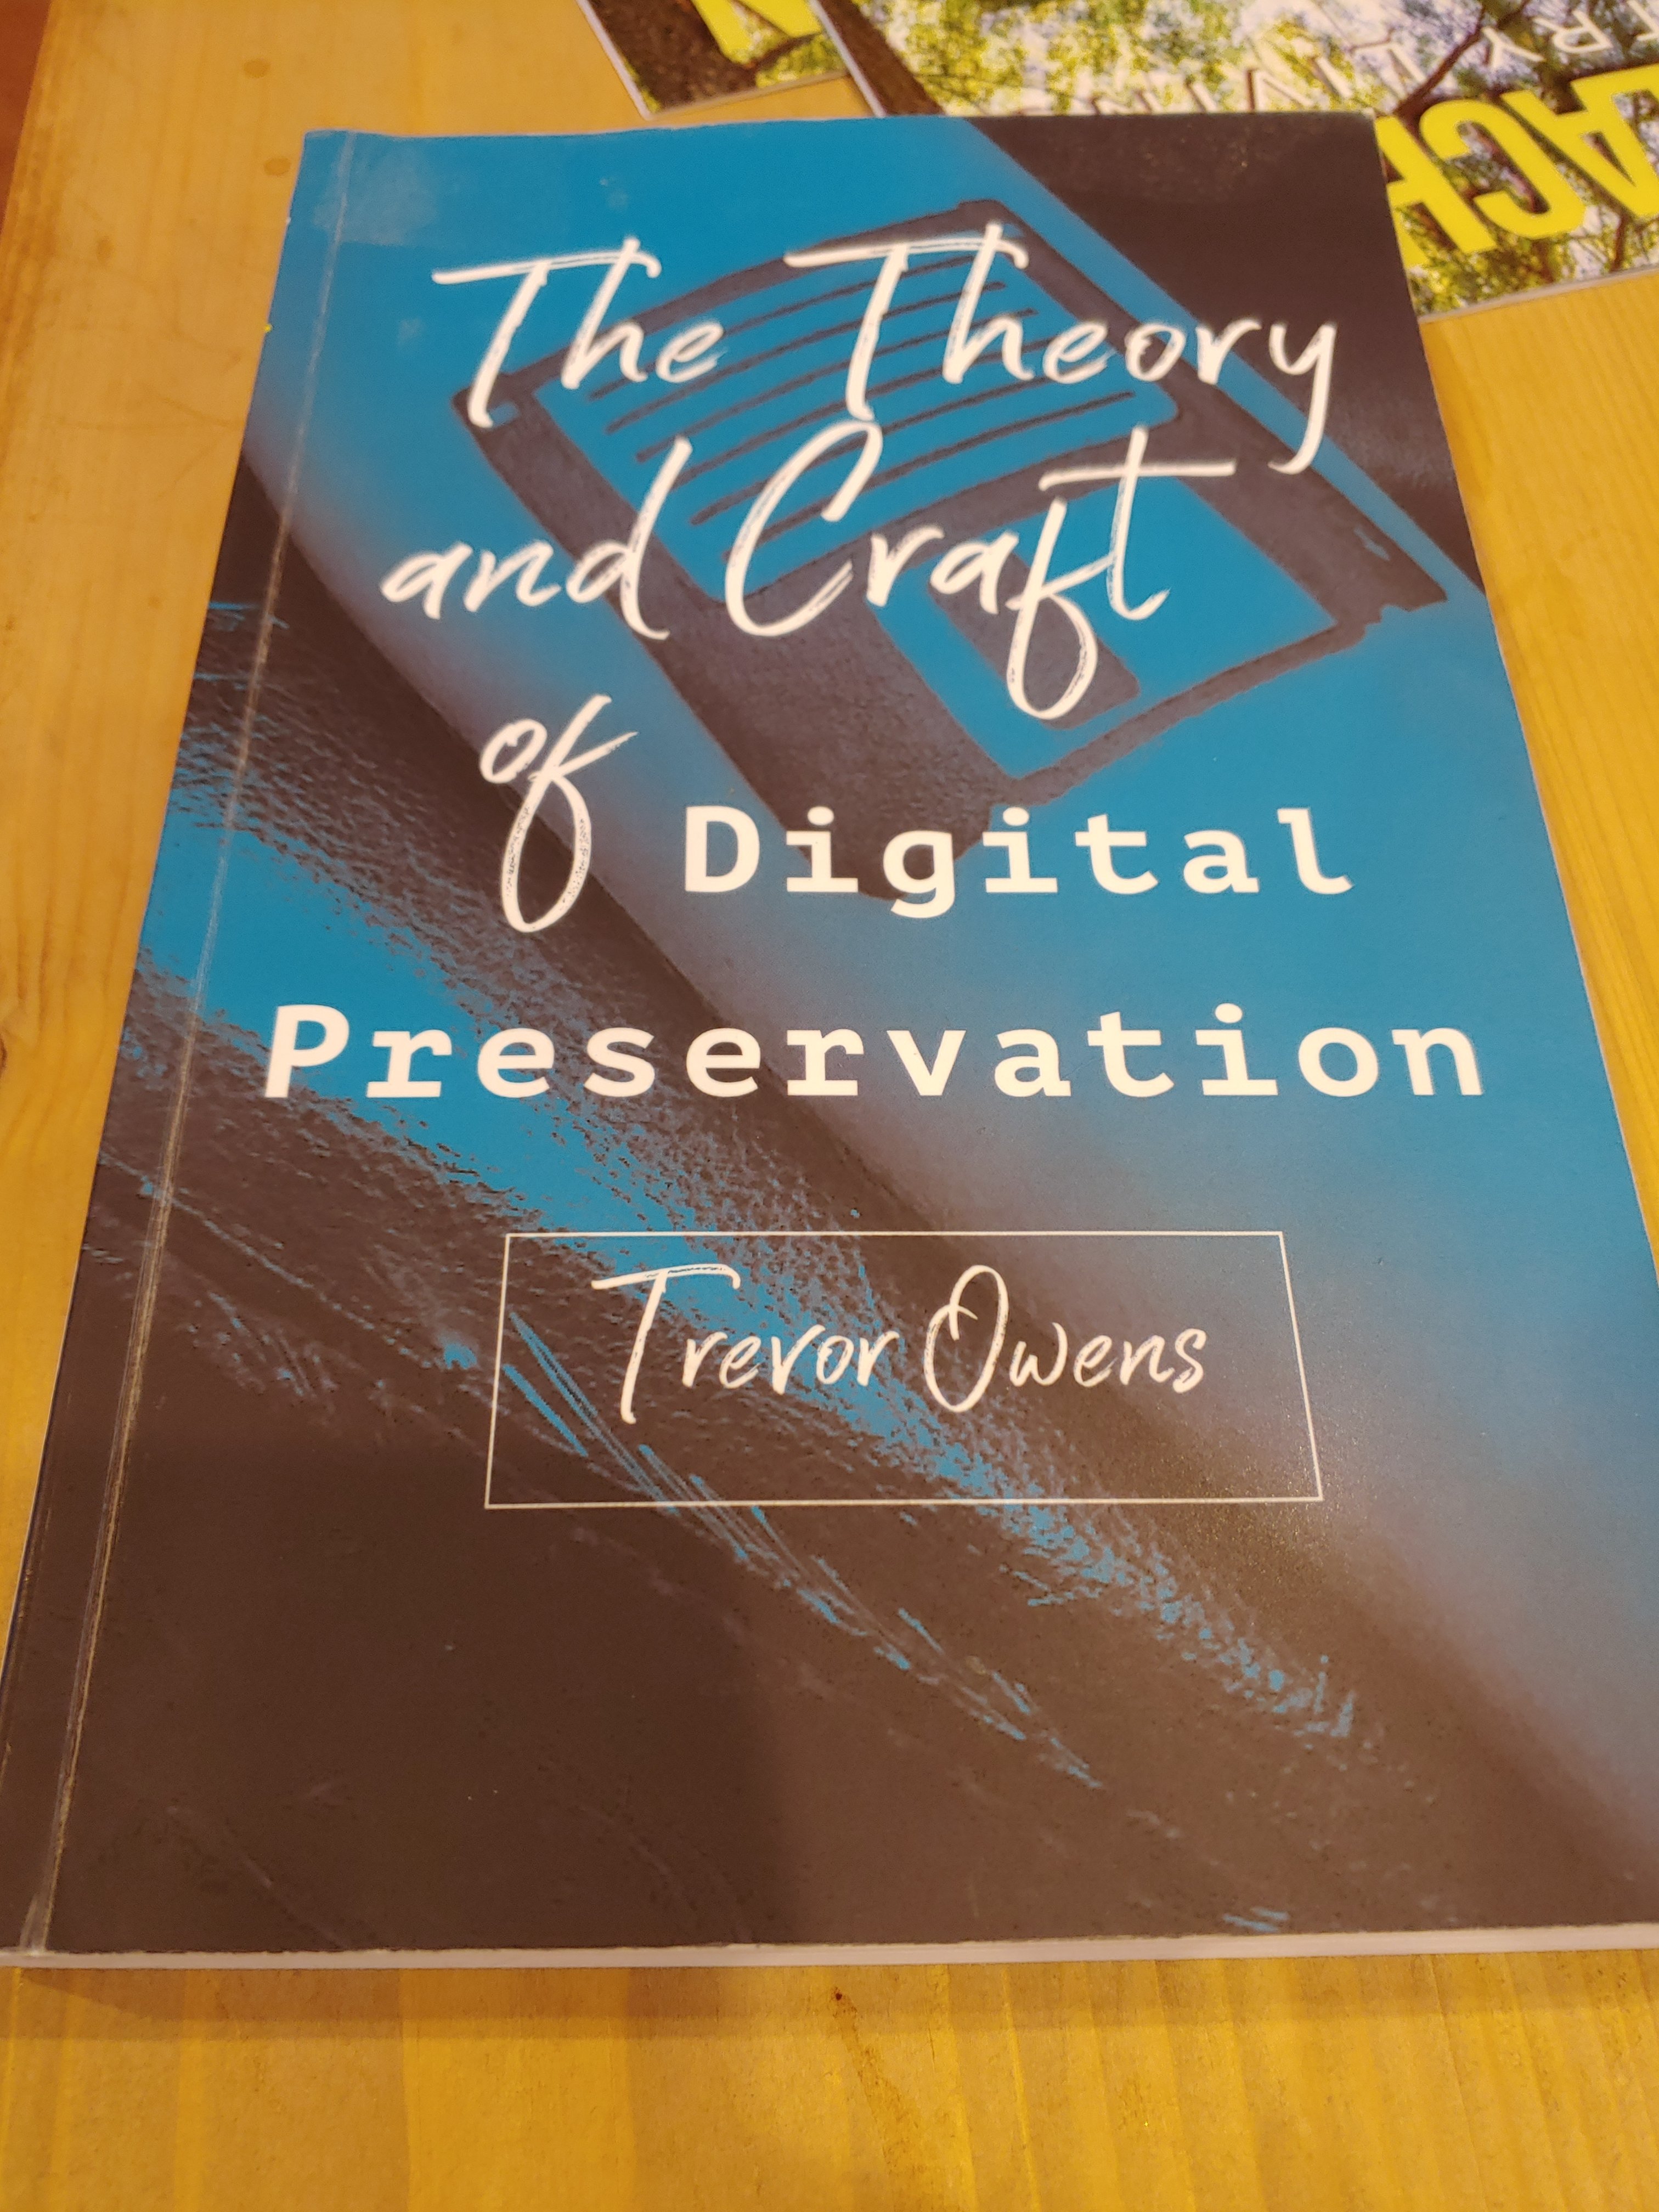 The cover of The Theory and Craft of Digital Preservation 